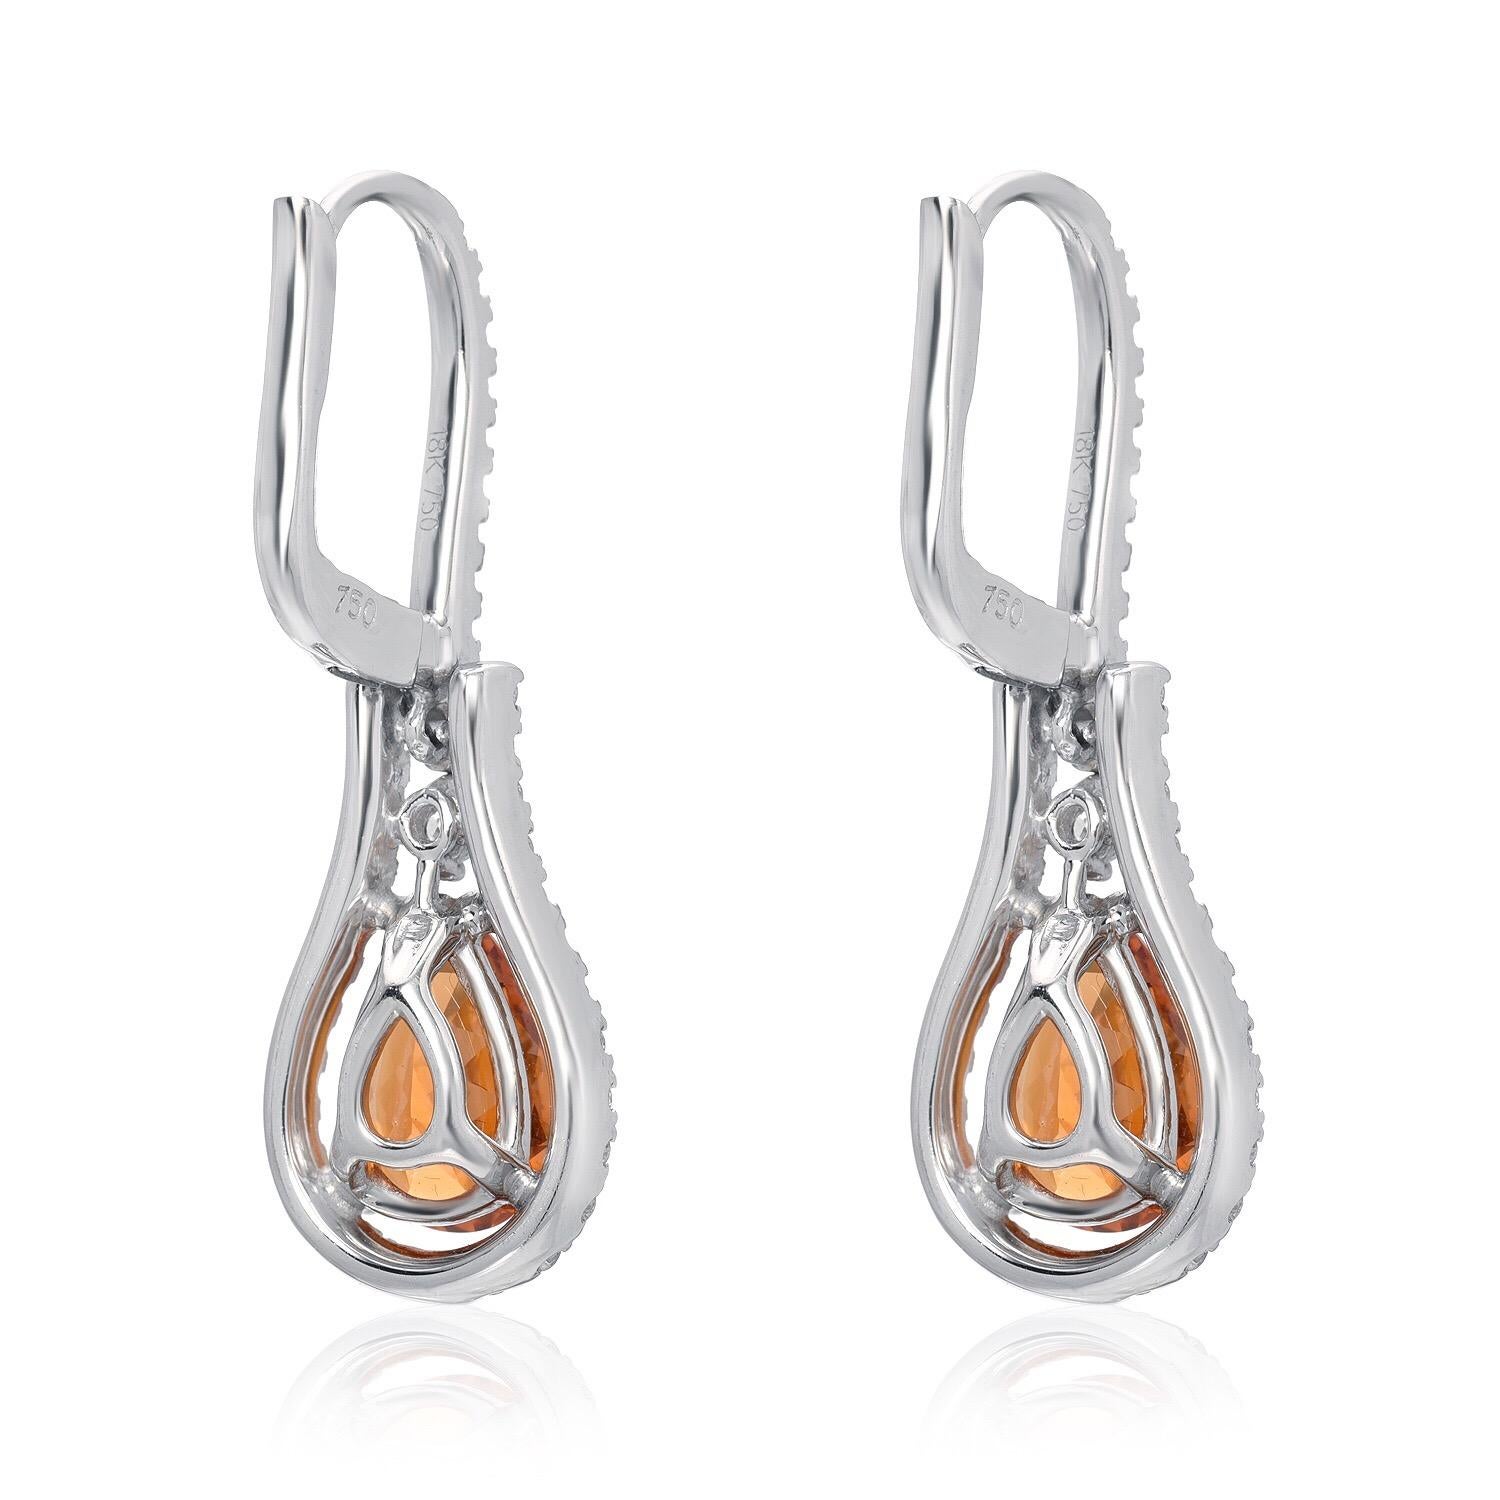 Mandarin Garnet pair of pear shapes, weighing a total of 3.43 carats, adorned by round brilliant diamonds weighing a total of 0.73 carats, are composing this vibrant pair of drop lever back 18K white gold diamond earrings for women.

1.25 inches in